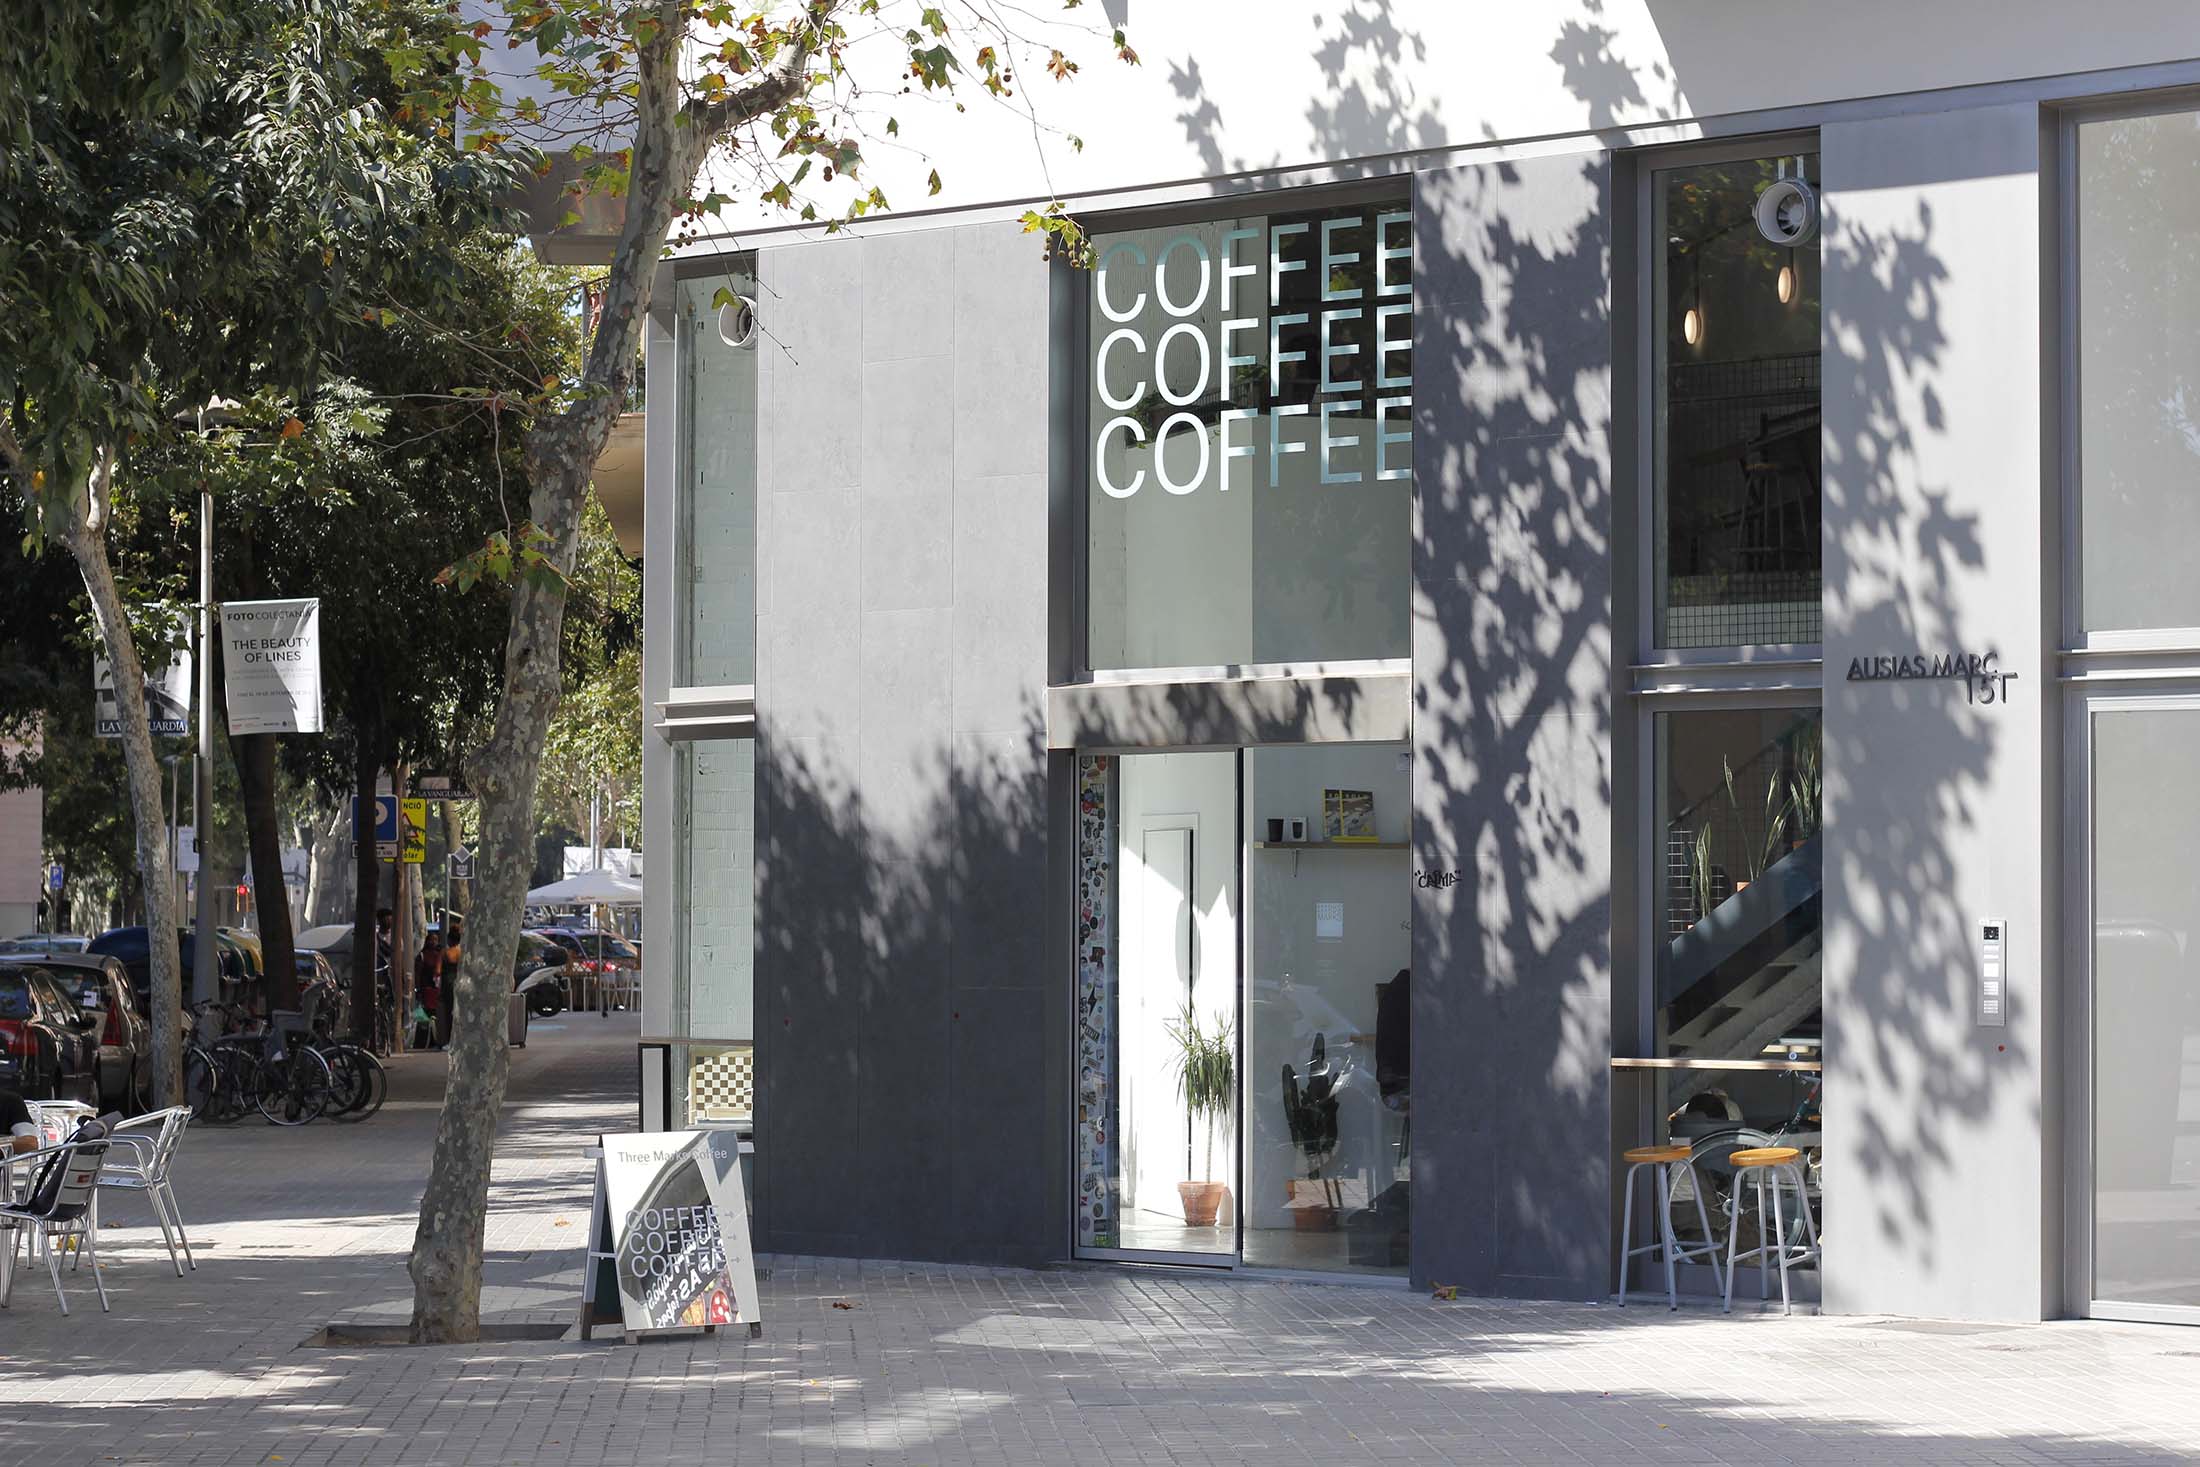 Third Wave Coffee in Barcelona